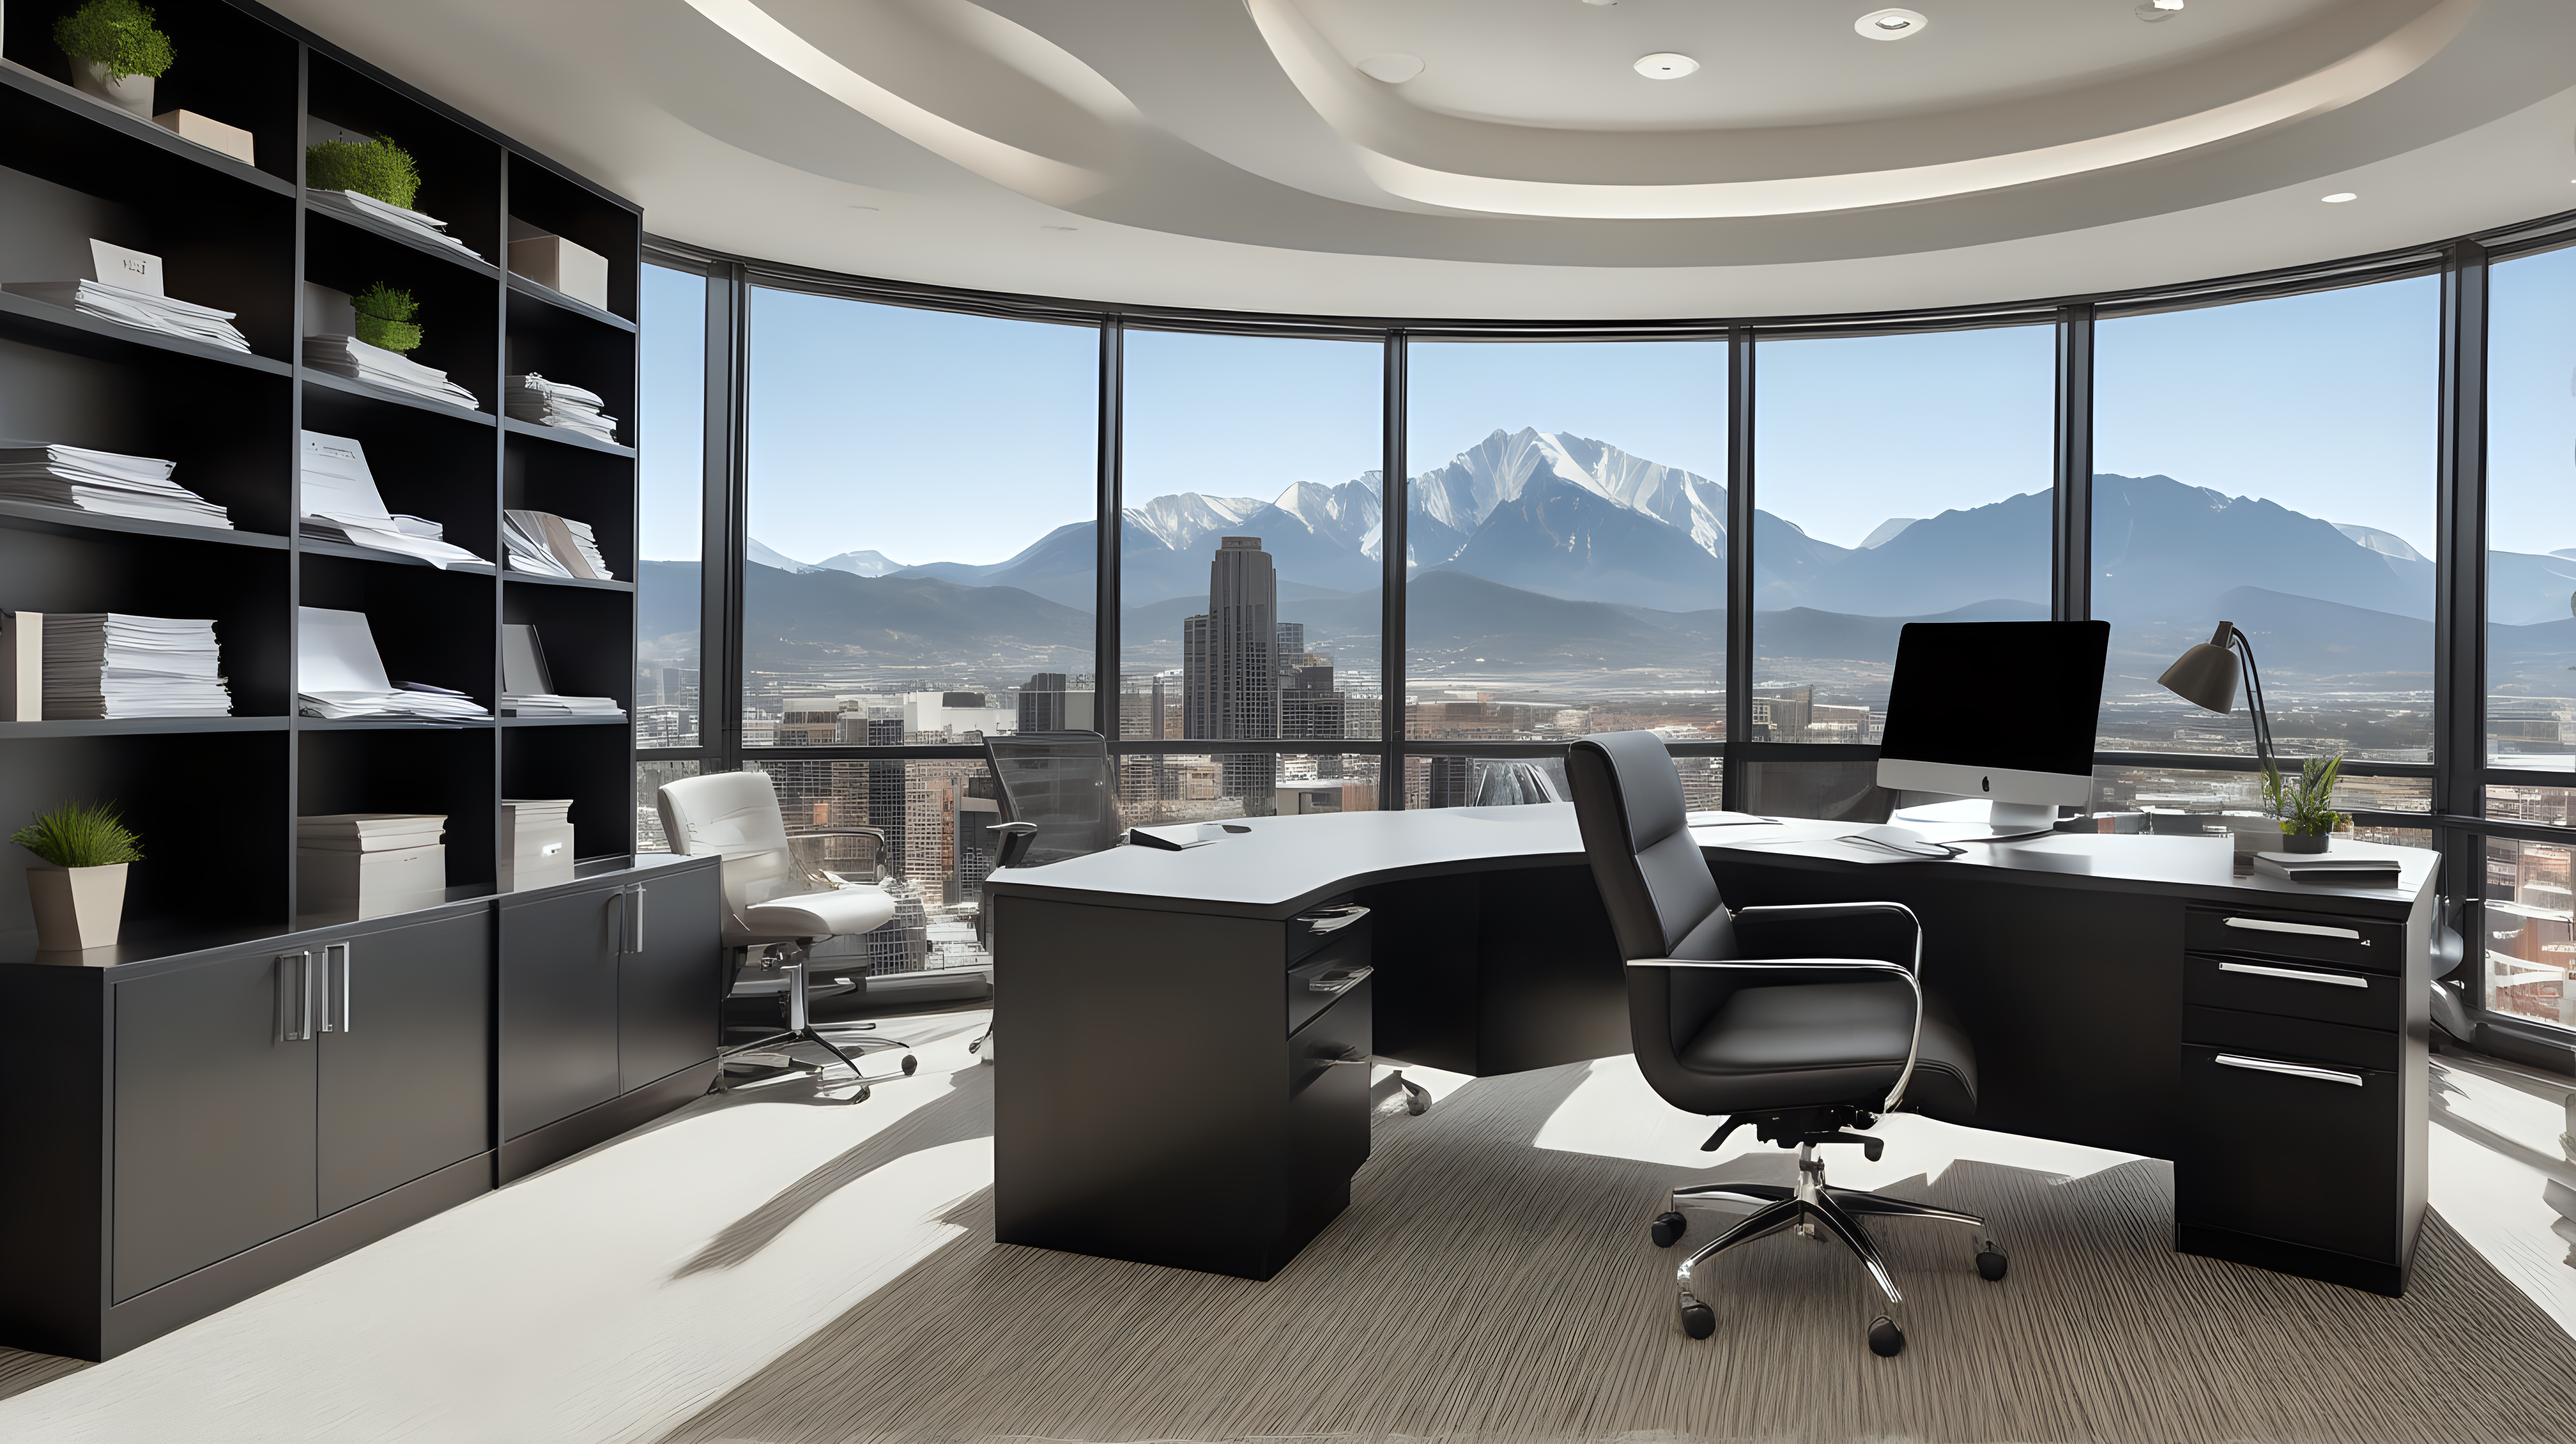 Step into the sleek and professional realm of a Property Owners' Association (PPE) administrator's office, where efficiency and contemporary design harmoniously converge against the urban panorama of a dynamic city. Imagine a meticulously organized desk for an accounting professional, adorned with cutting-edge design furniture, including a sleek black leather chair. Only one chair. This desk provides a commanding view of the cityscape with majestic mountains in the distance. Capture the essence of relaxed elegance with warm tones punctuated by touches of light, creating an atmosphere that resonates with the dynamism and positivity unique ans soft touches of light, creating an atmosphere that resonates with the precision and reliability crucial for accounting work.

Introduce prominent visual elements symbolizing the accounting aspect of property management. Envision an elegant and modern filing a big cabinet with well organised workbooks all along the wall . On the desk show meticulously organized financial reports, documents, and blueprints well visible. Illuminate the space with sleek, adjustable lighting to foster a welcoming yet efficient ambiance.

As the accounting professional draws inspiration from the vibrant city and the striking mountains in the background, they are fully equipped to approach property management responsibilities with a positive, organized, and professional mindset in their stylish and purposefully designed workspace. 